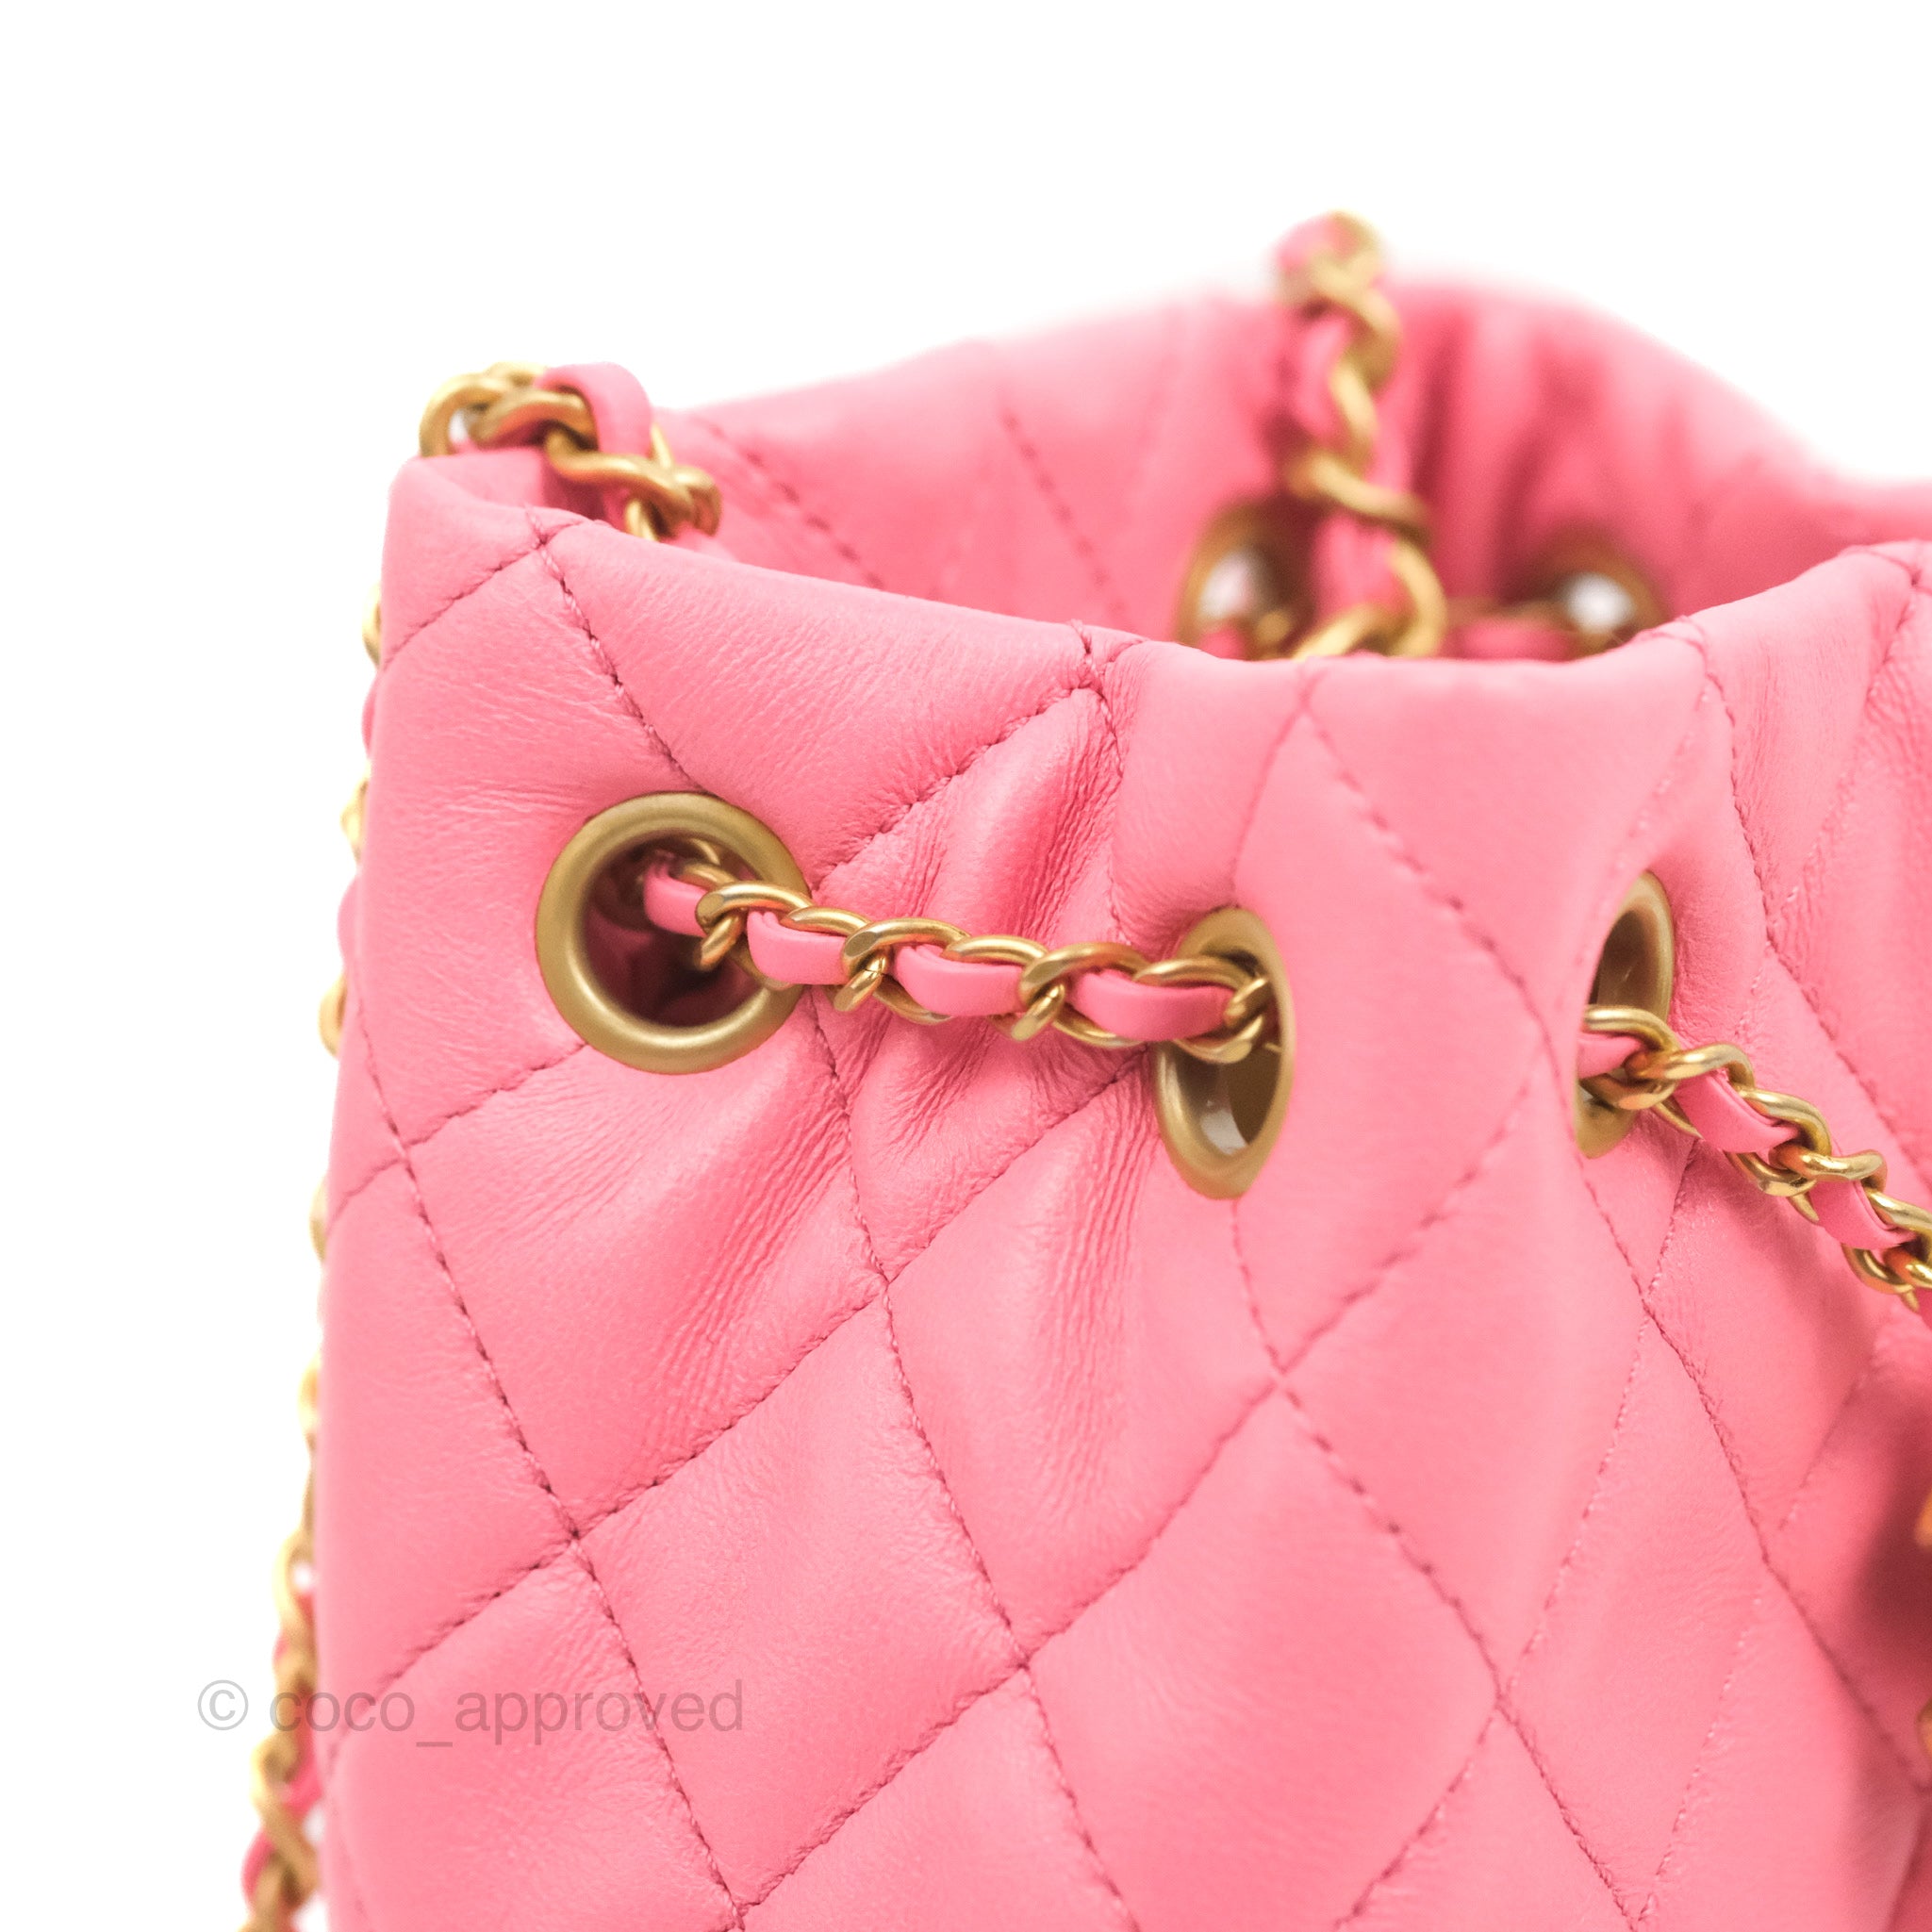 Chanel Quilted Crystal Pearl Crush Drawstring Bucket Bag Pink Lambskin –  Coco Approved Studio